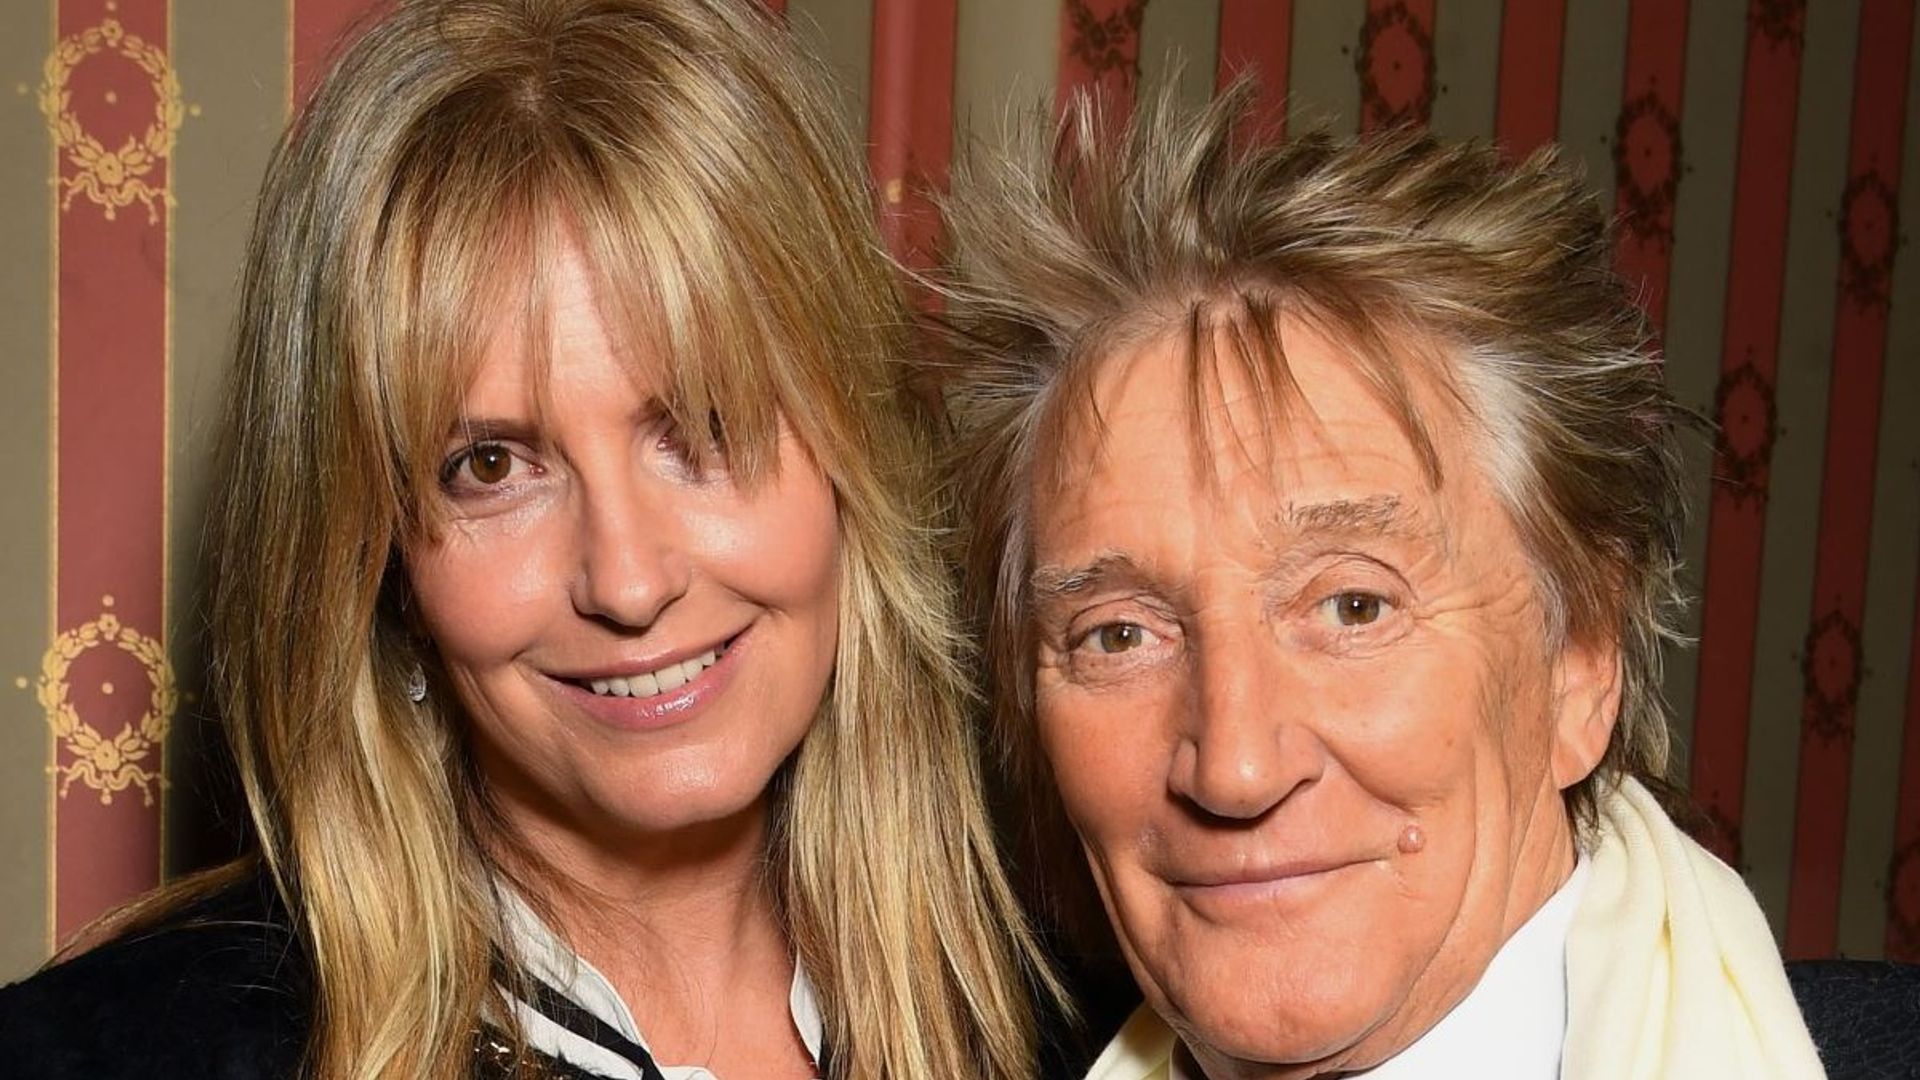 Penny Lancaster sparks debate in latest photo with husband Rod Stewart